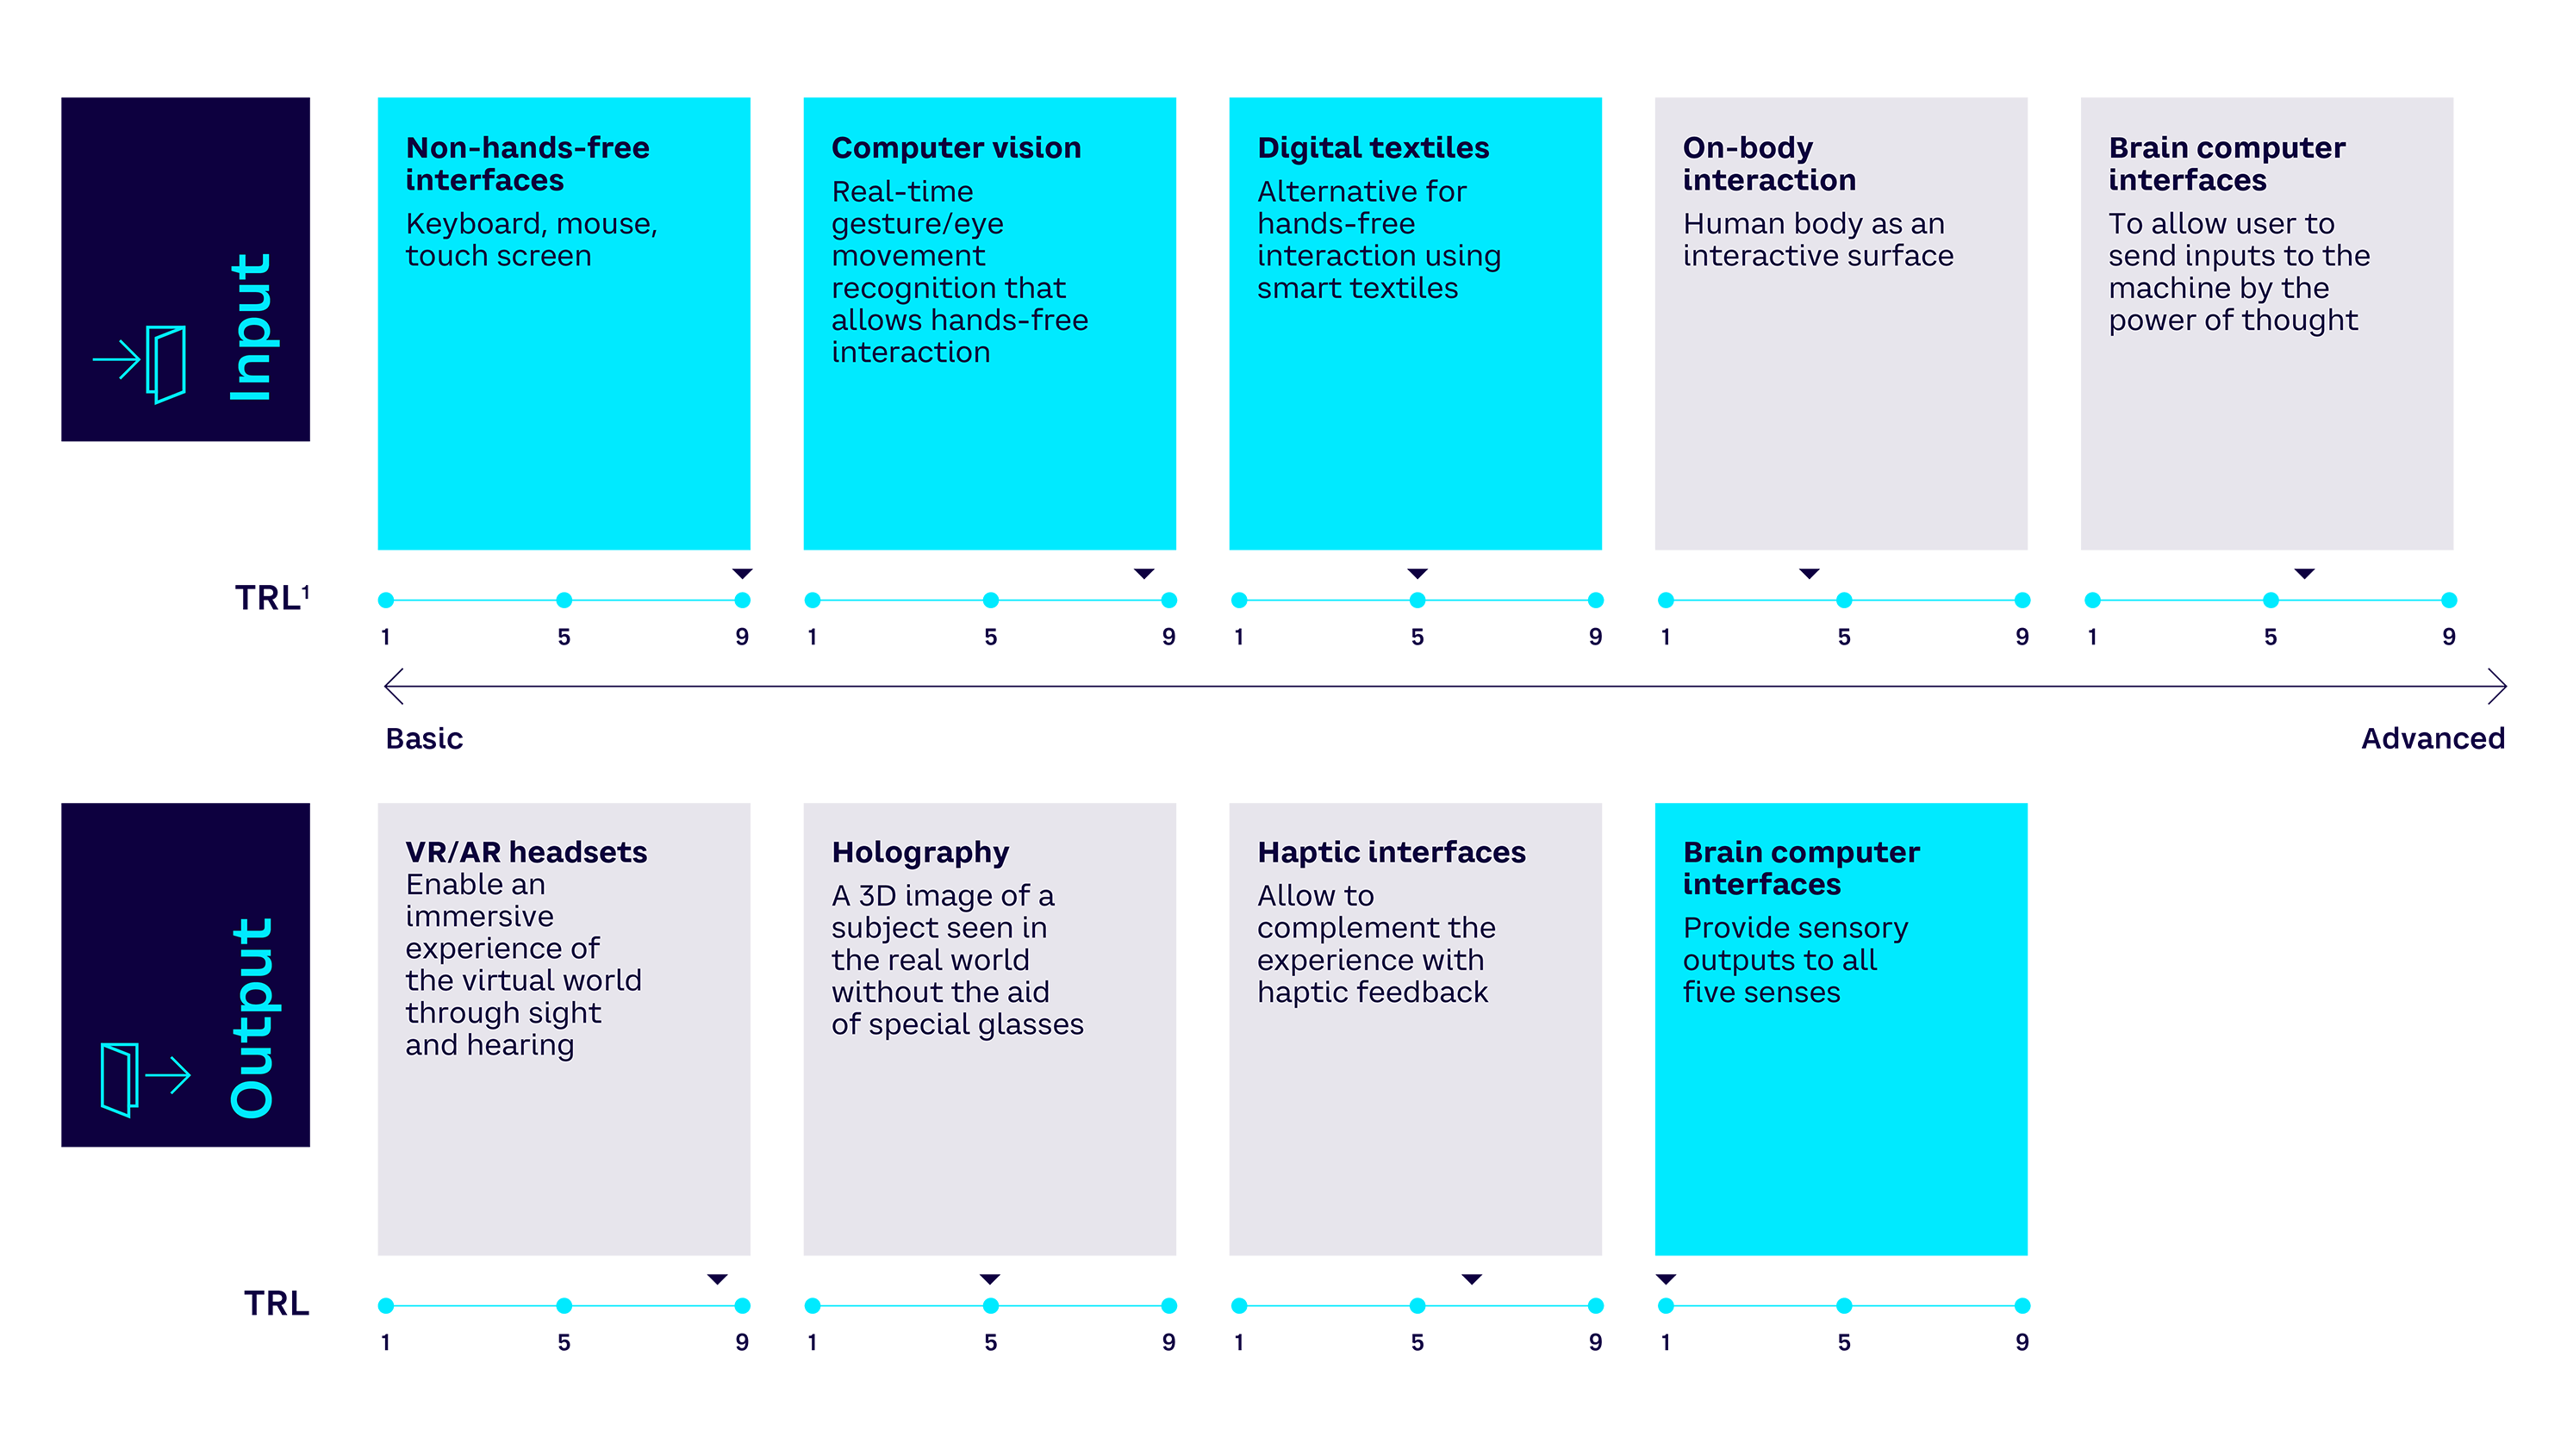 Fig 12 — Types of human-machine interface and their technology maturity